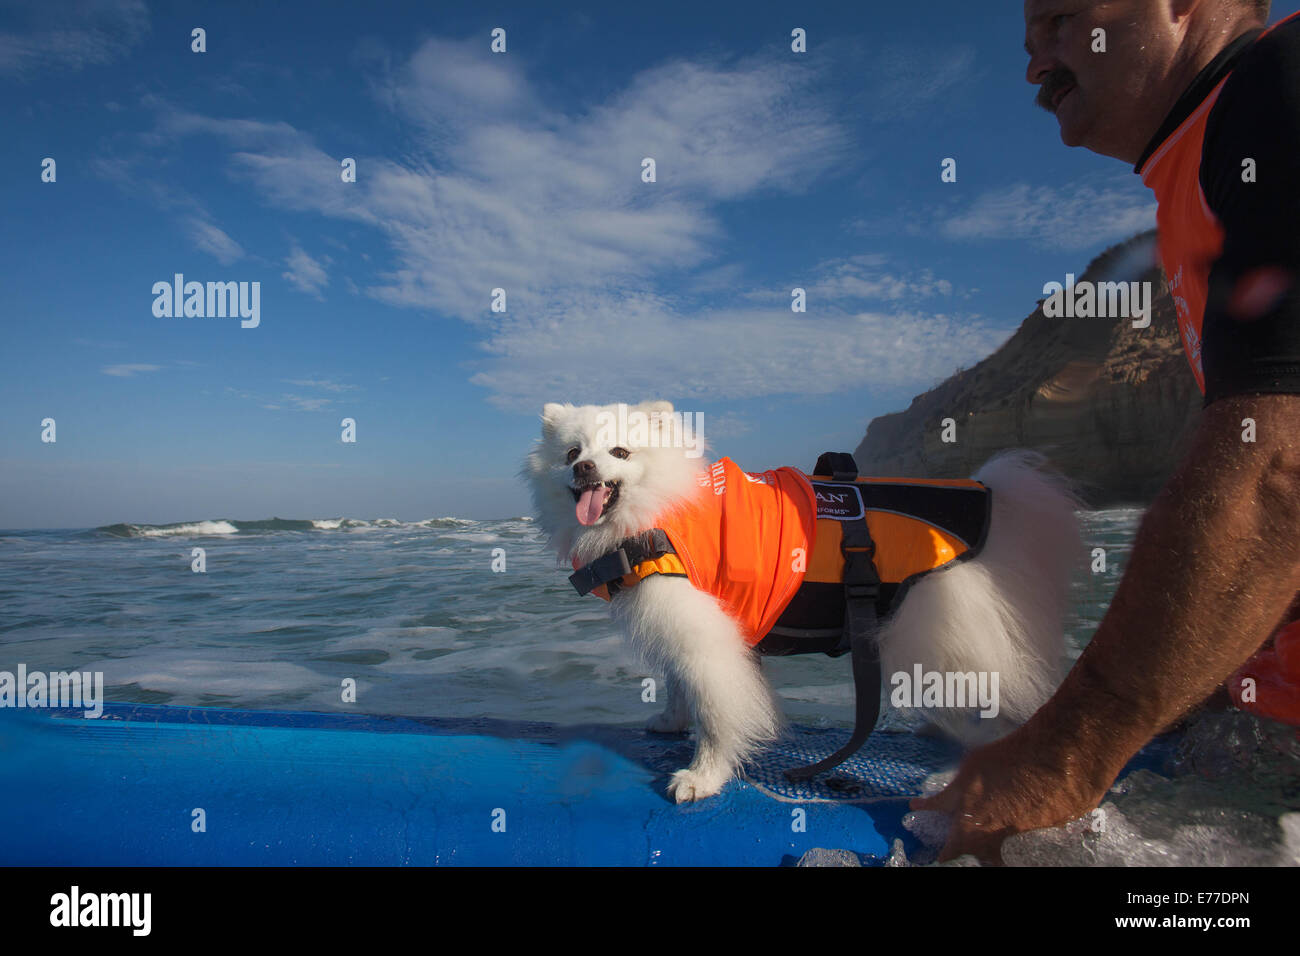 Delmar, CA, US. 7th Sep, 2014. Surf Dog Surf-A-Thon, Surf Dog competiton held at Delmars' dog beach., just North of San Diego. All shapes and sizes of canines showed up for the event.The Surf Dog Surf-A-Thon is a groovy event that raises funds for orphan pets and programs at Helen Woodward Animal Center. Owners and their pets participate.Seen here:.Dog Ziggy Breed American Eskimo Toy Credit:  Daren Fentiman/ZUMA Wire/Alamy Live News Stock Photo